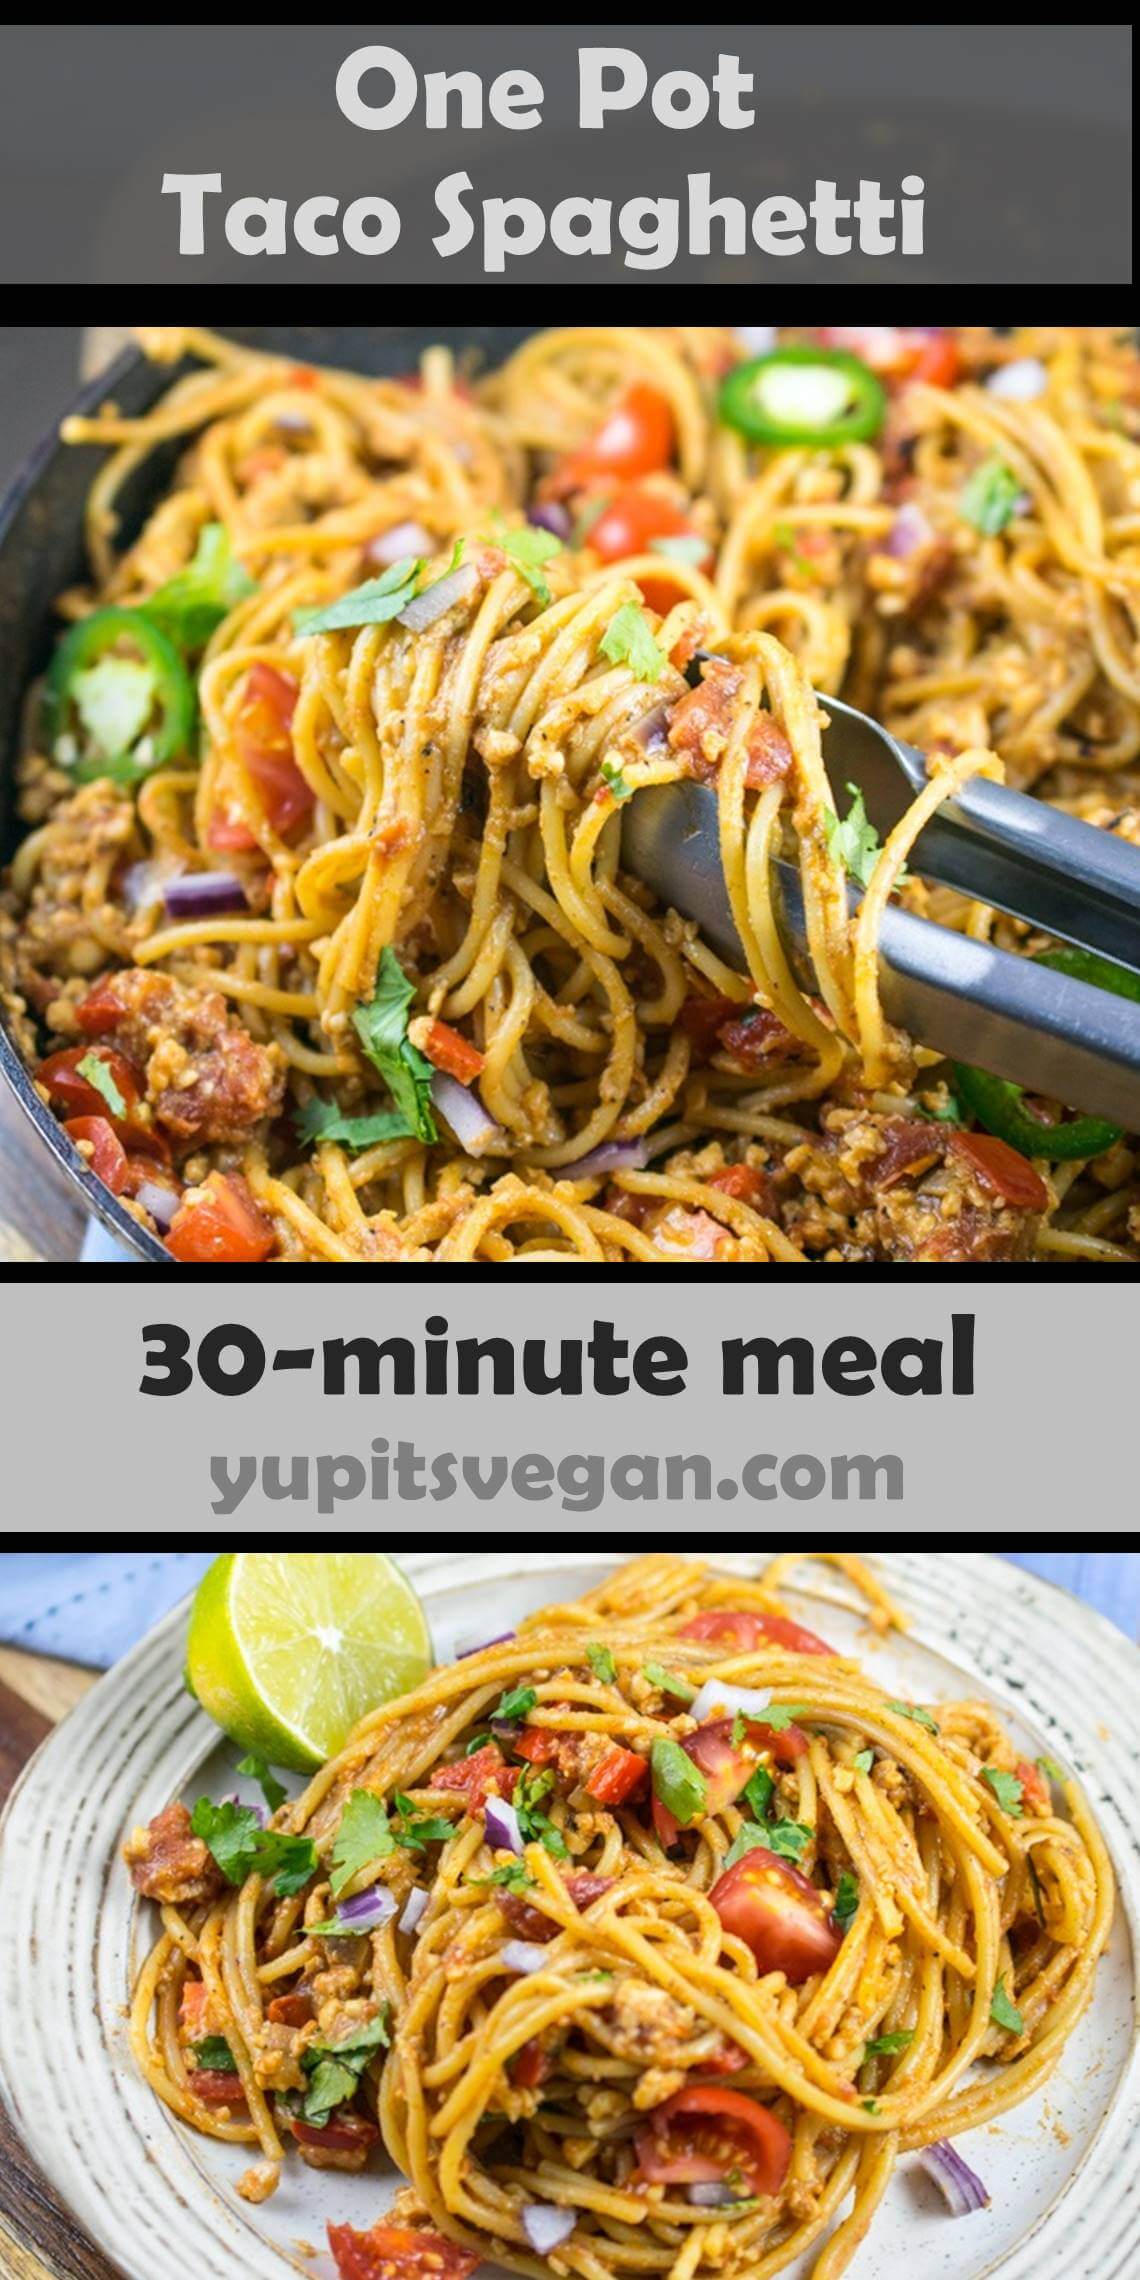 One Pot Taco Spaghetti with Tempeh and Peppers | Yup, it's Vegan